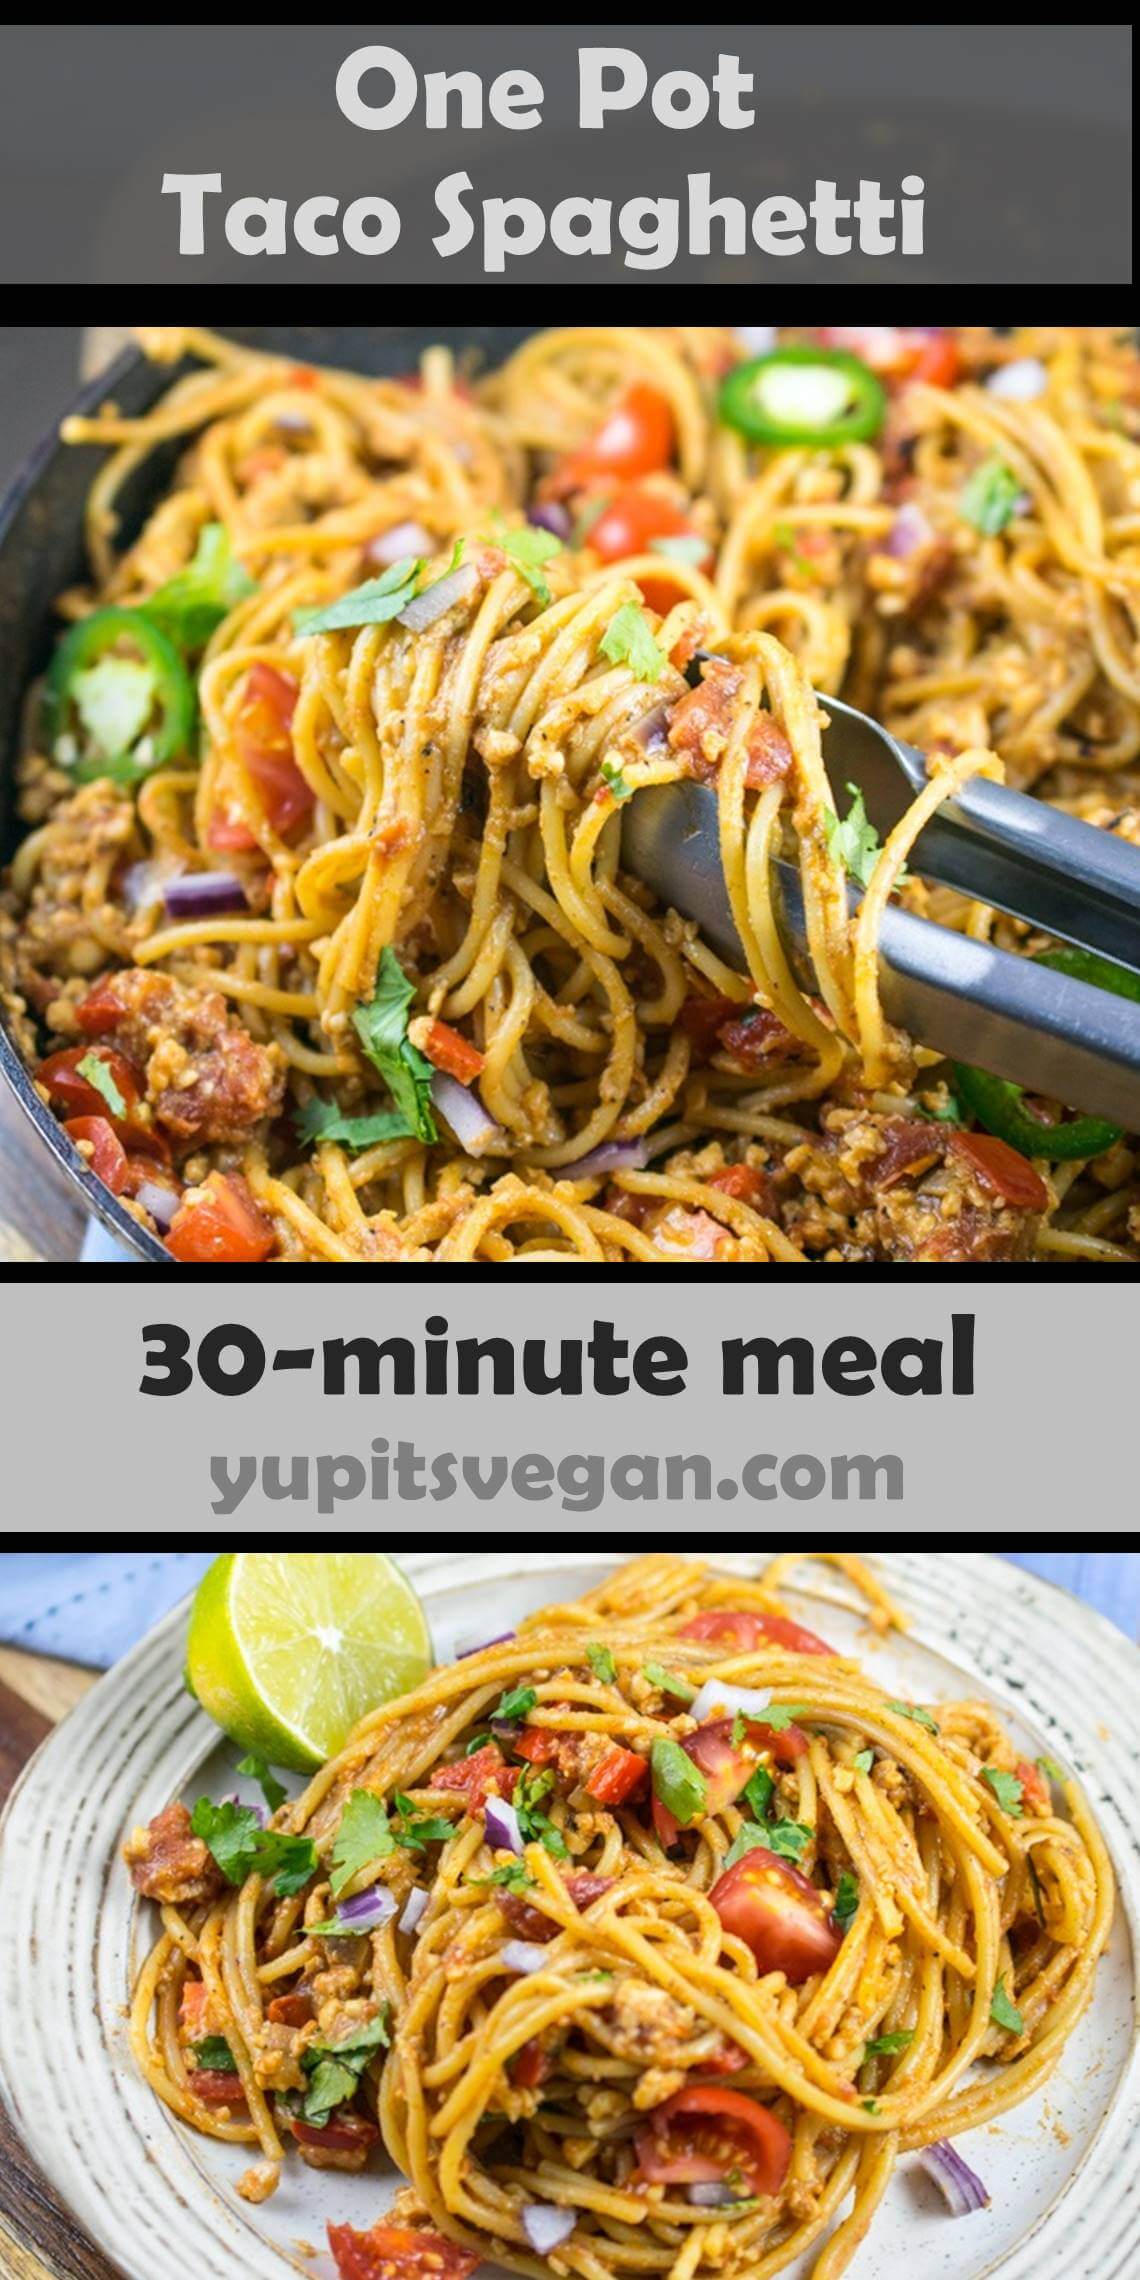 One Pot Taco Spaghetti with Tempeh and Peppers | Yup, it's Vegan